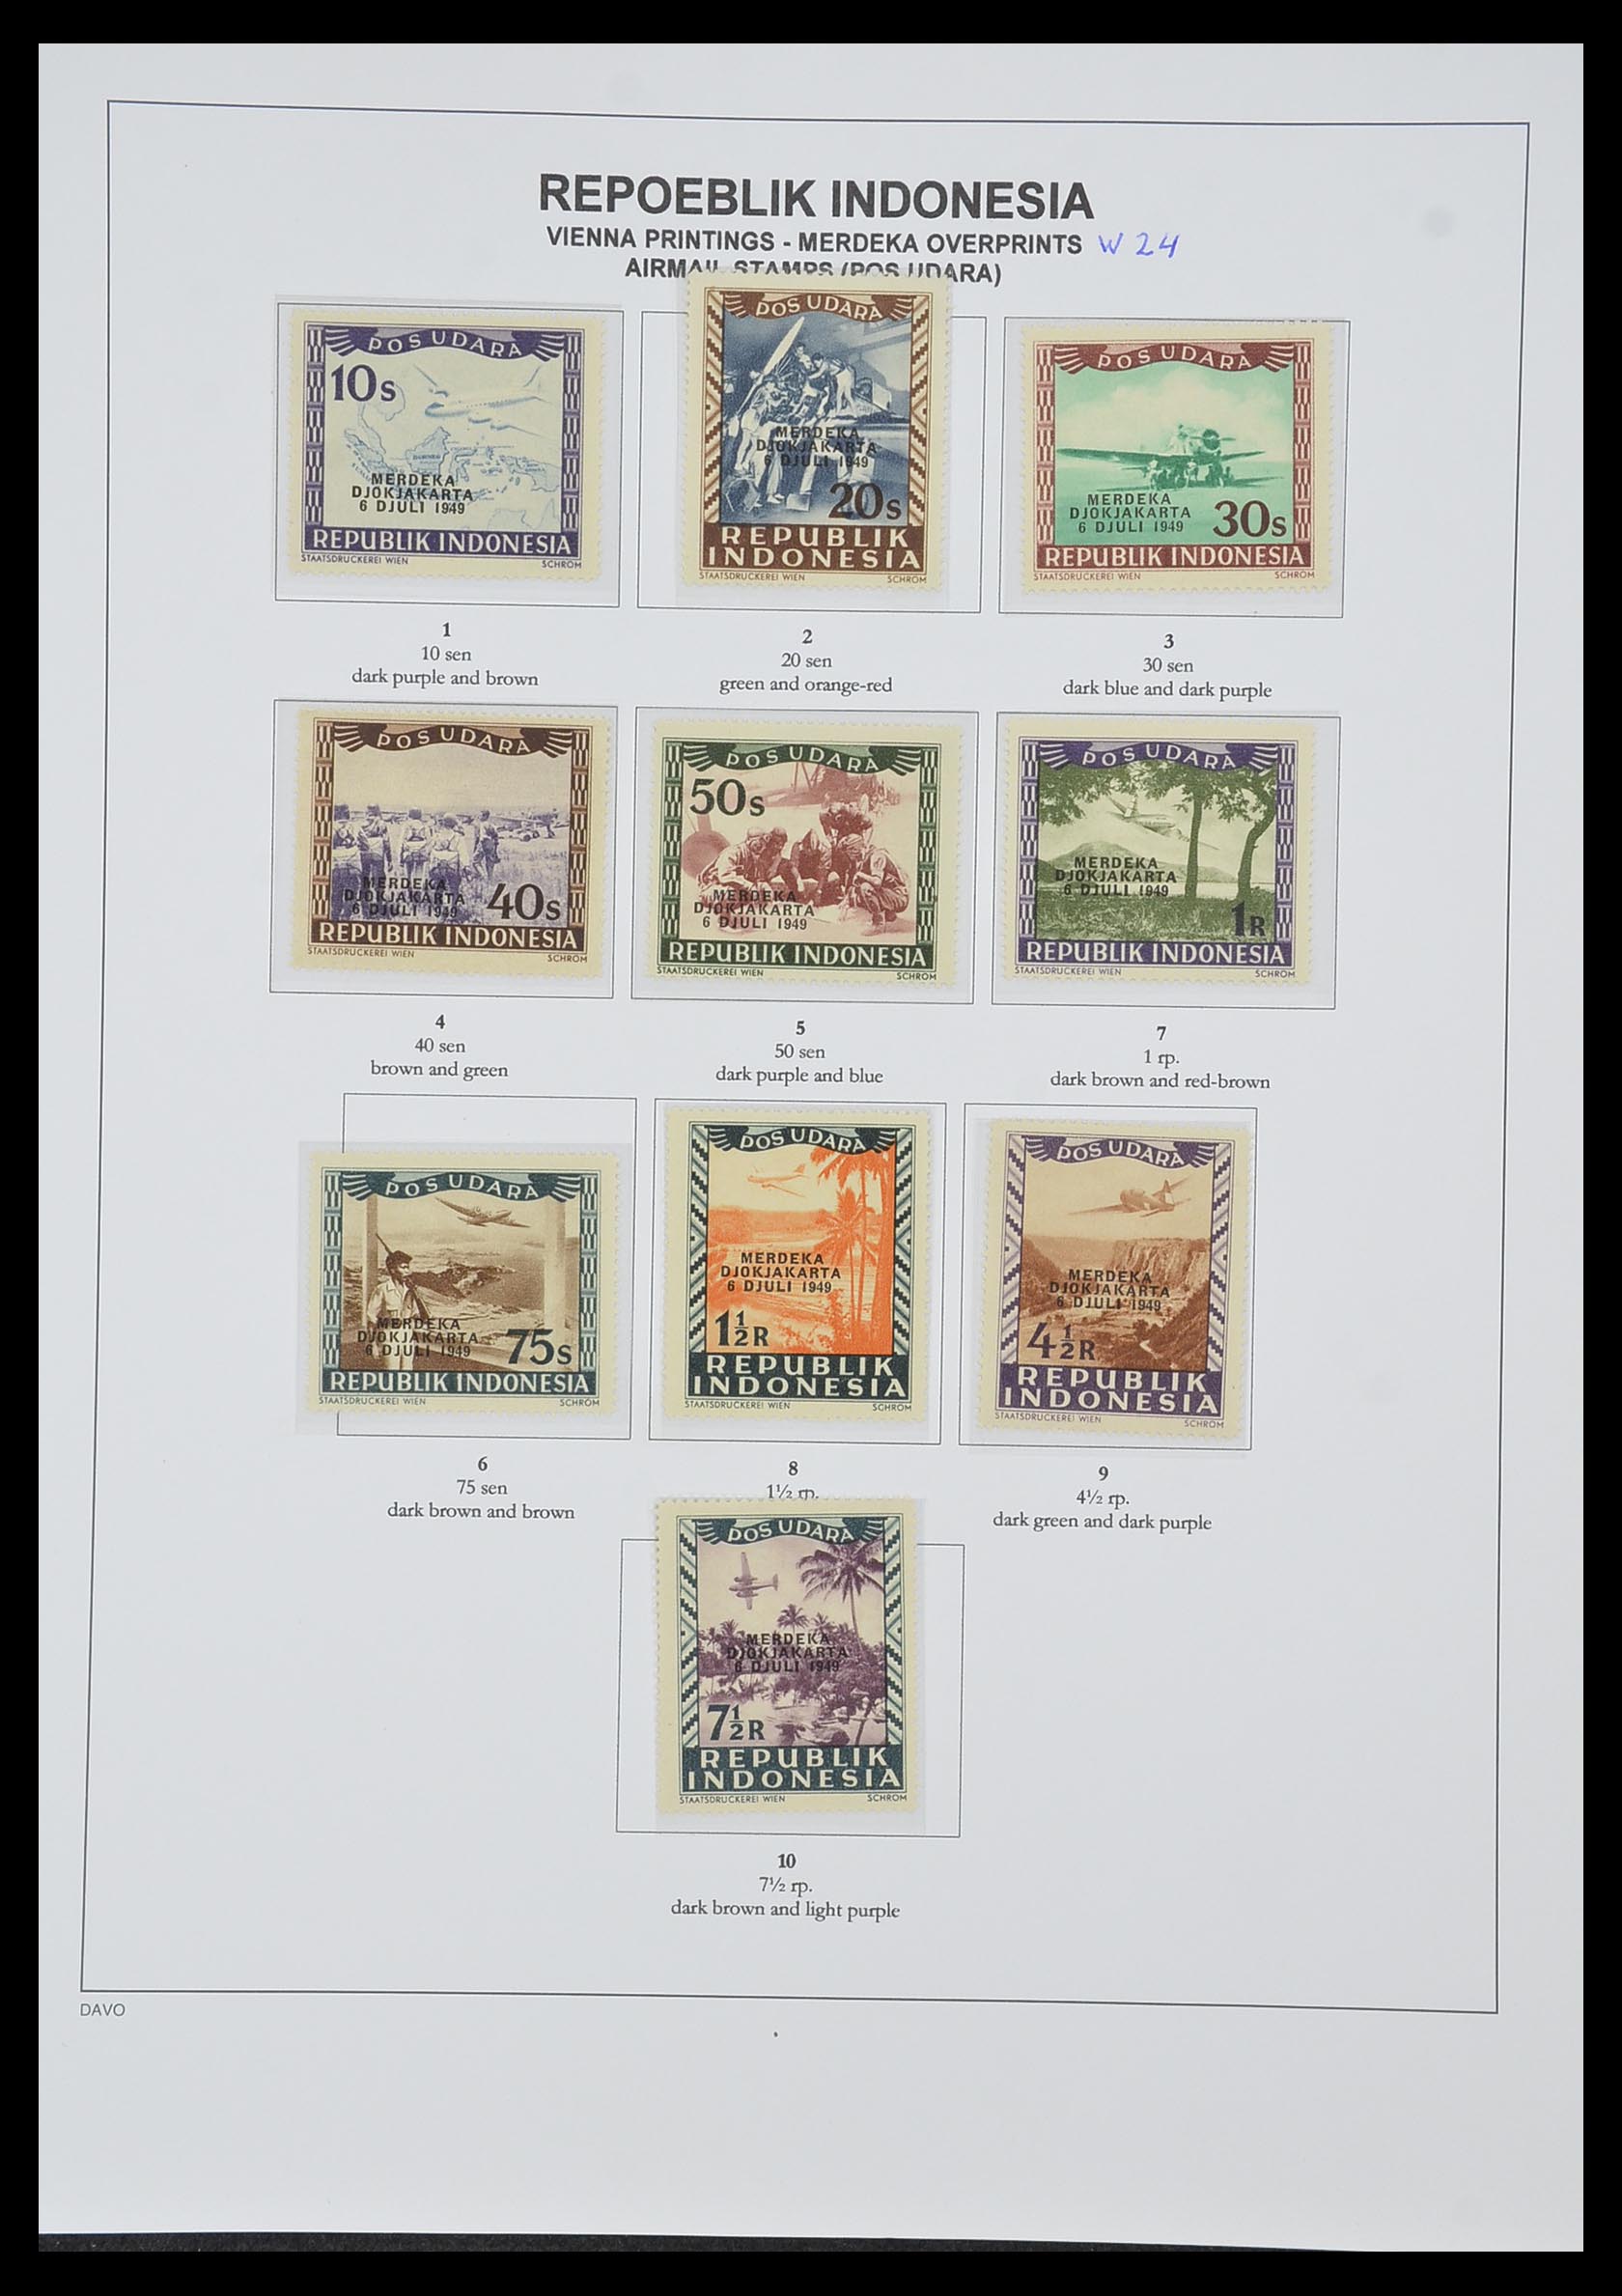 33988 039 - Stamp collection 33988 Vienna printings Indonesia.